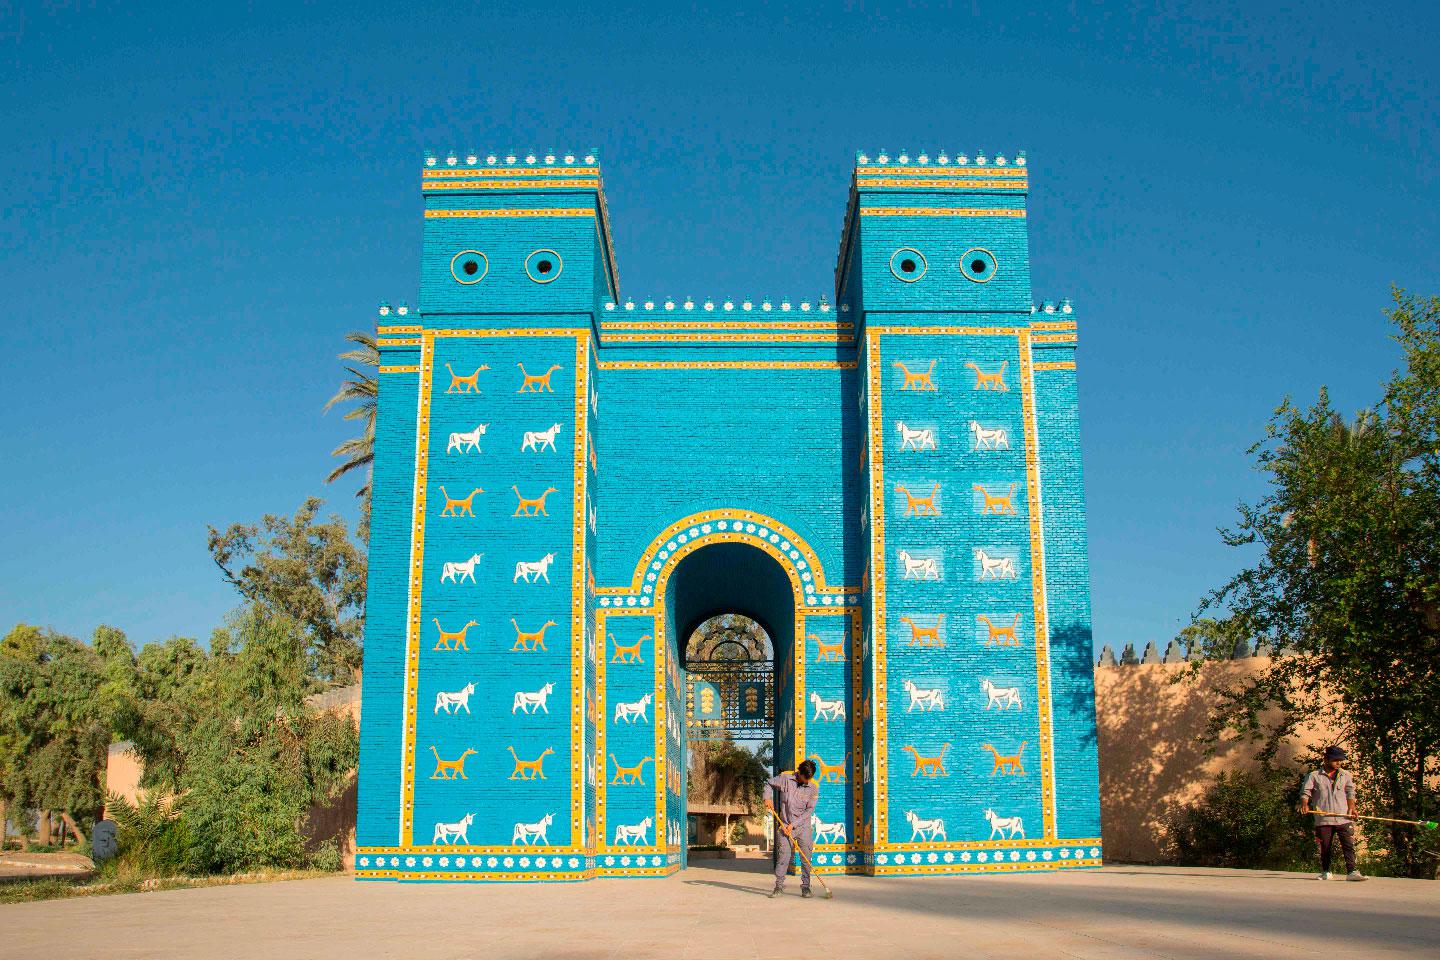 The Ishtar Gate at the ancient archaeological site of Babylon